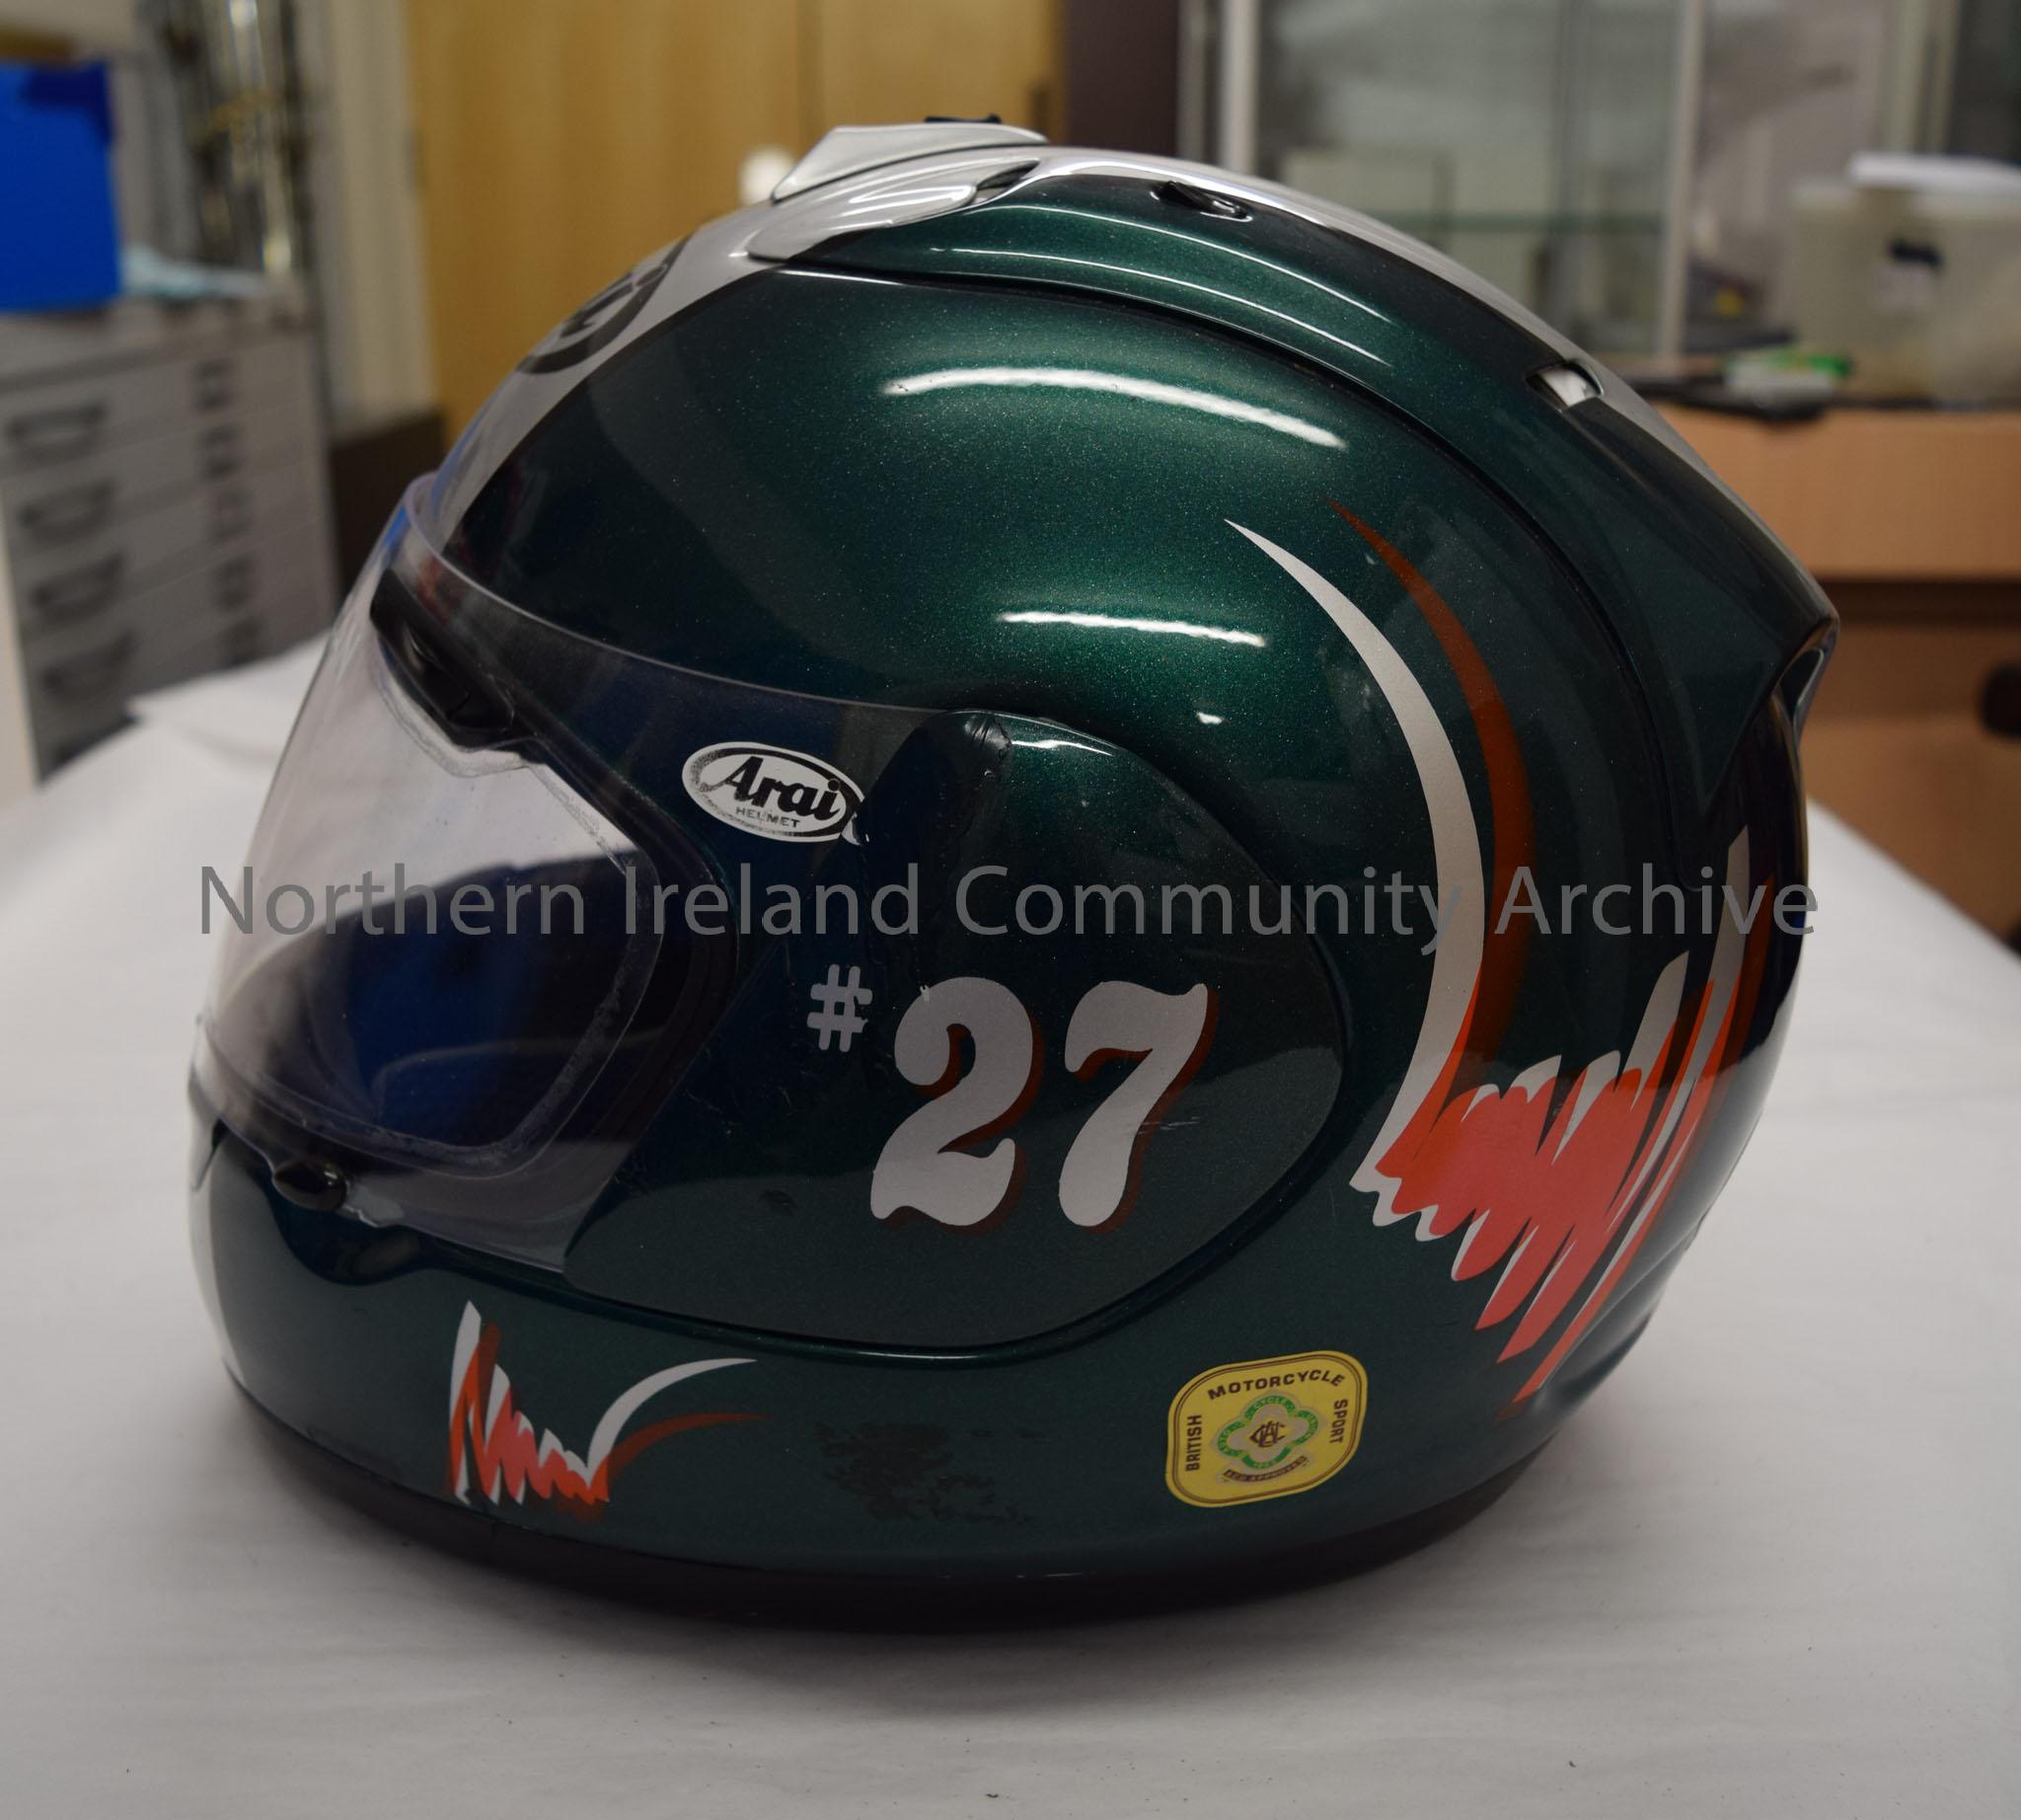 Arai motorcycle helmet belonging to James McCann. Dark green with silver stripes down the middle, orange squiggle on the side and an image of the cart… – 2016.85 (3)